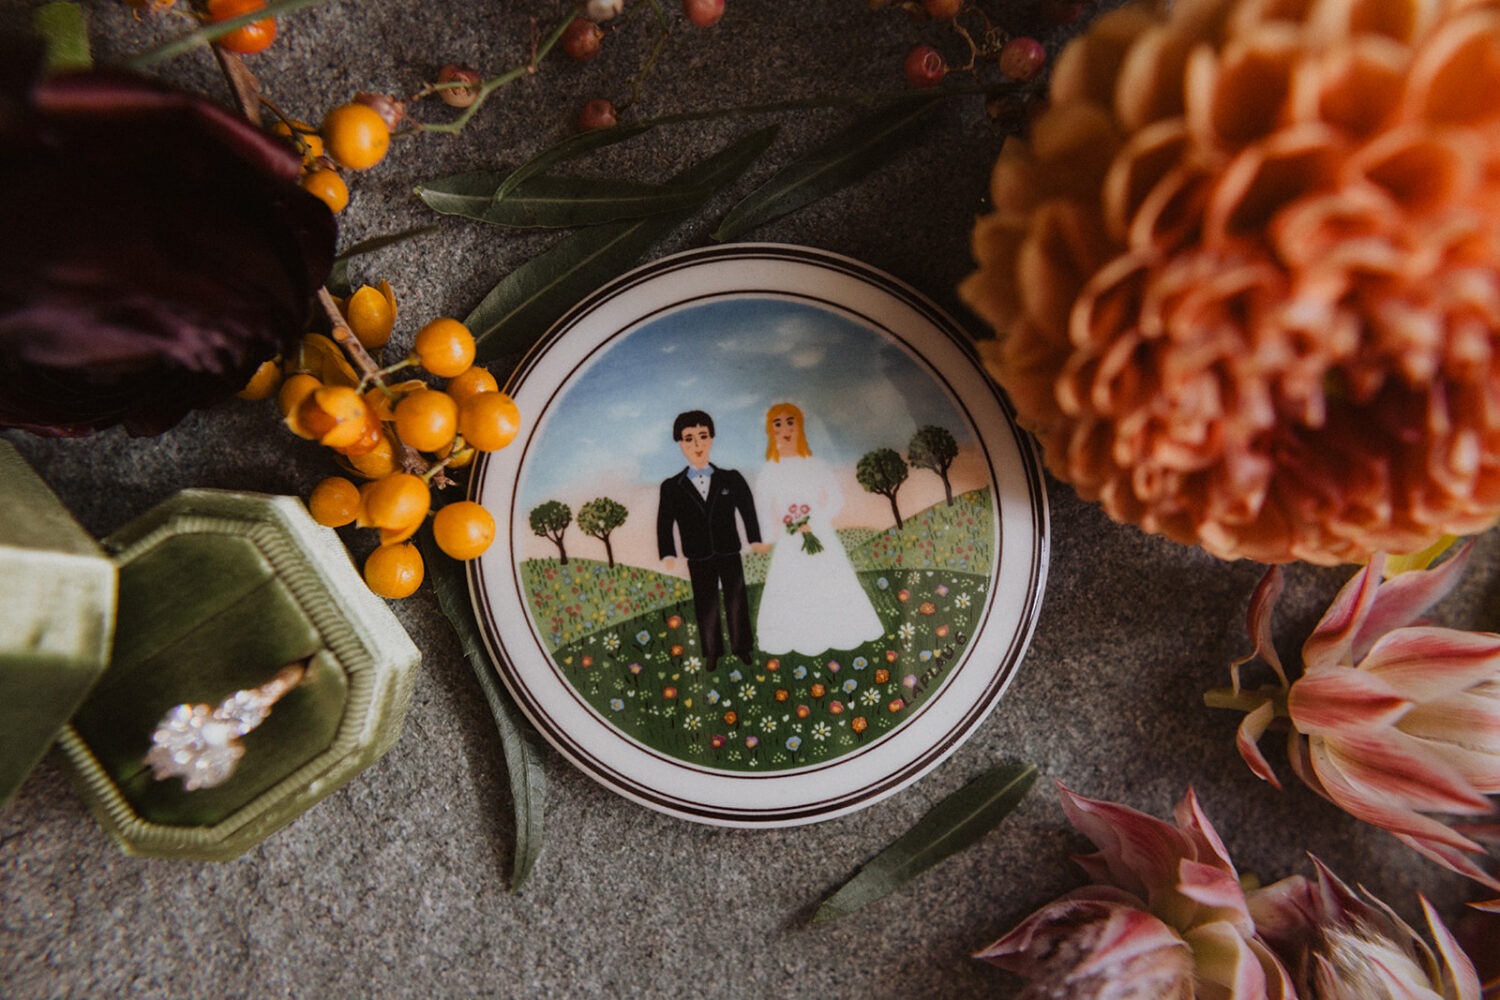 hand-painted plate for couples wedding details